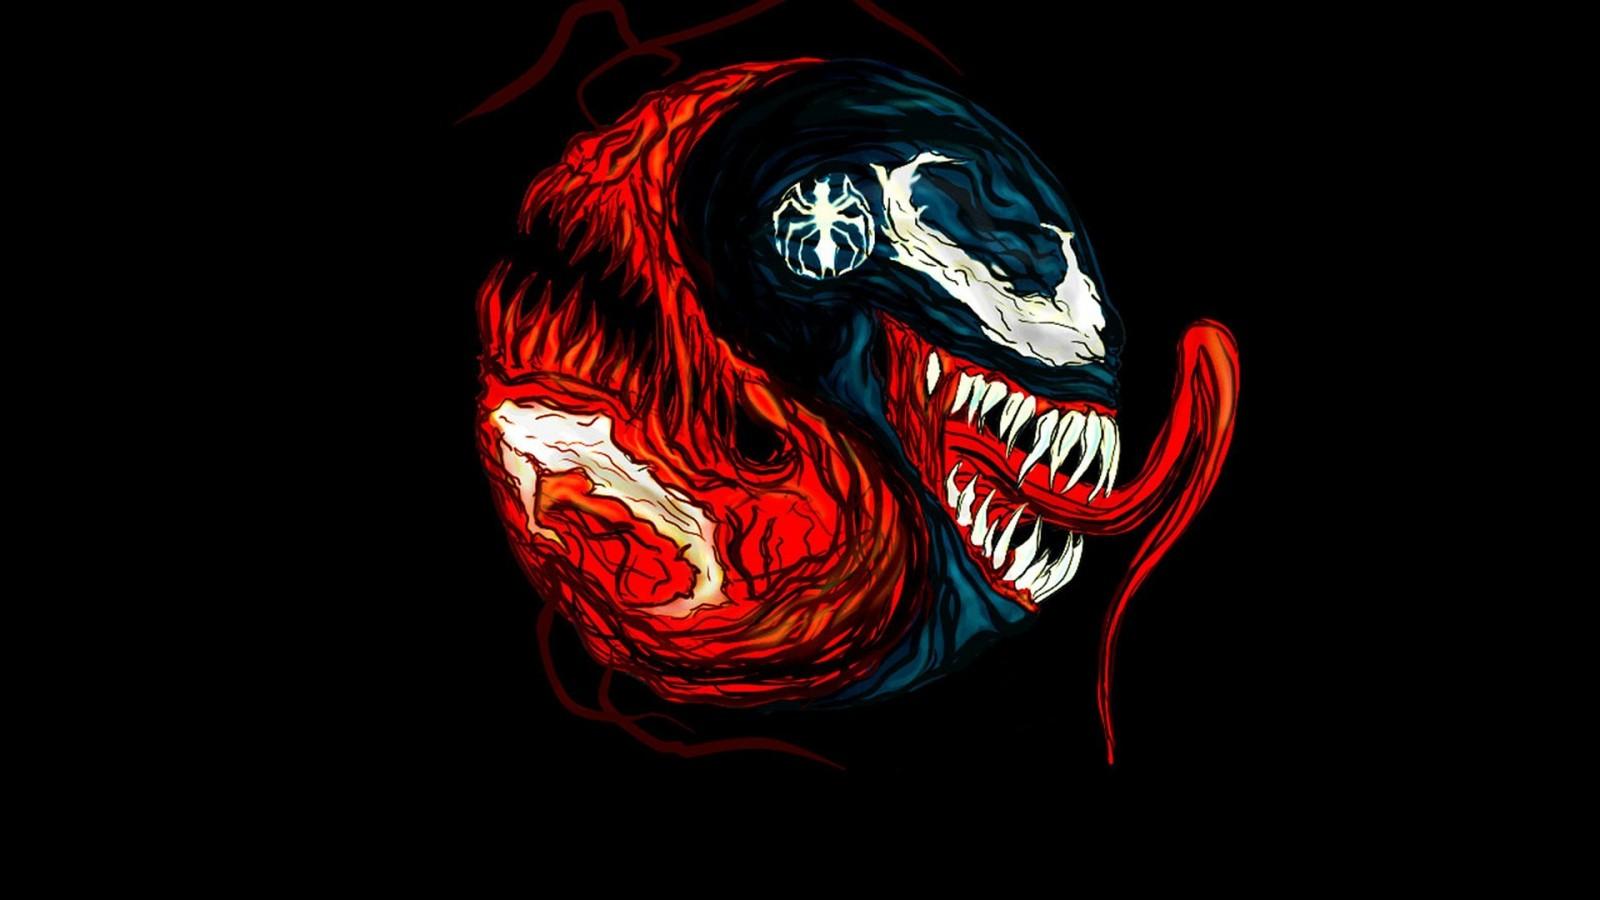 Some Venom/ Carnage wallpaper I have. Most are 1600:900